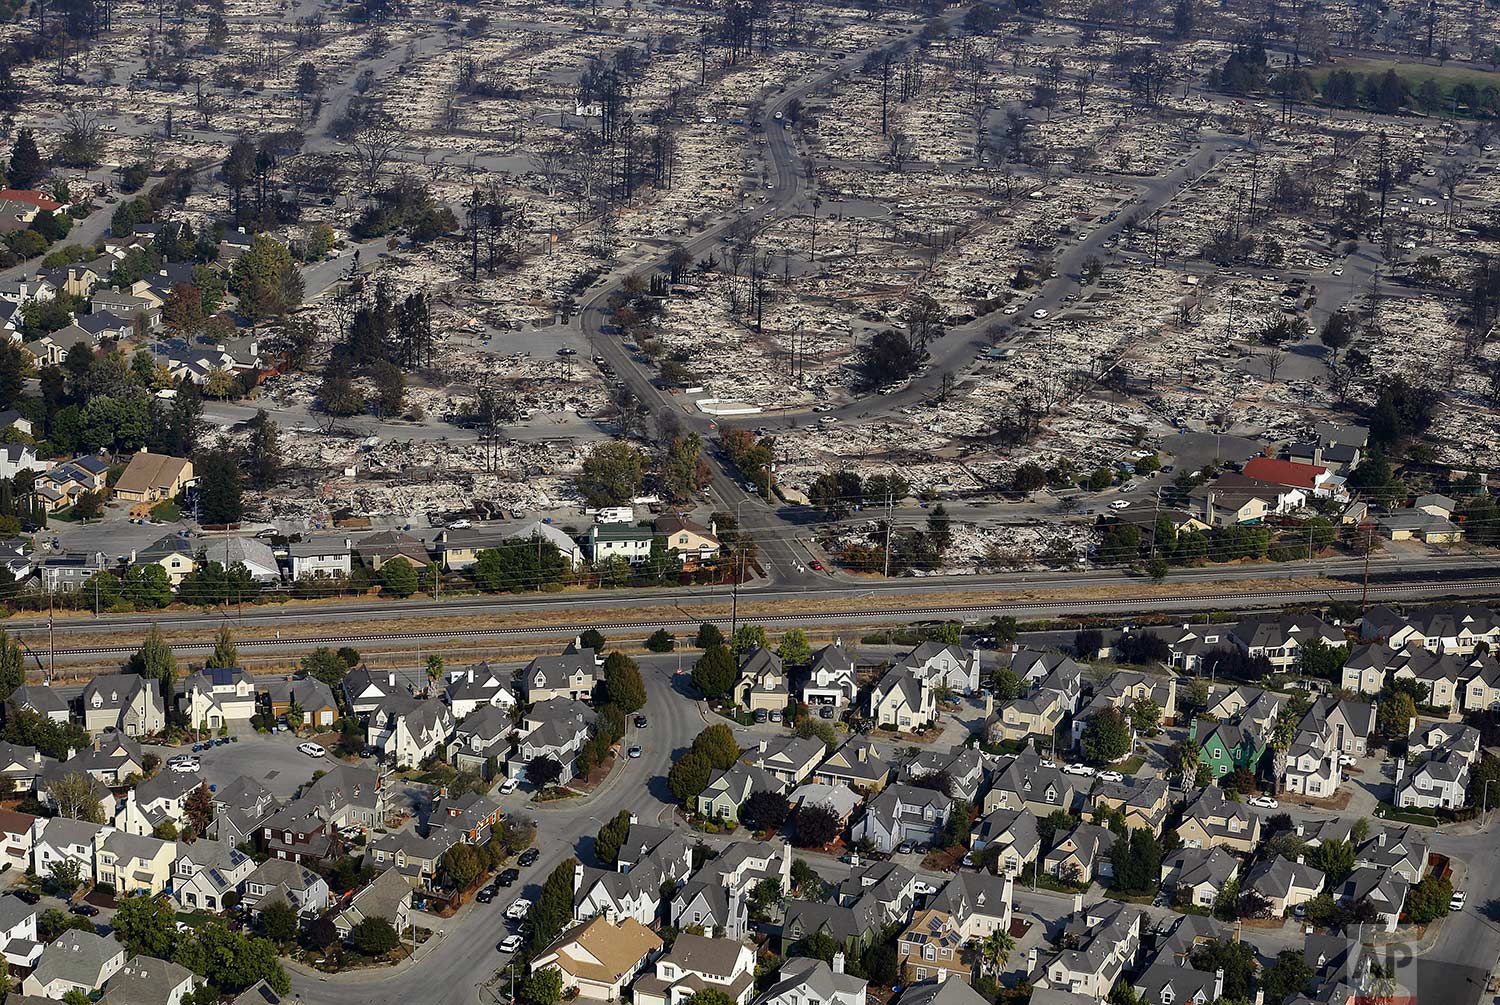 Homes destroyed by fire are seen in an aerial view in Santa Rosa, Calif., o...